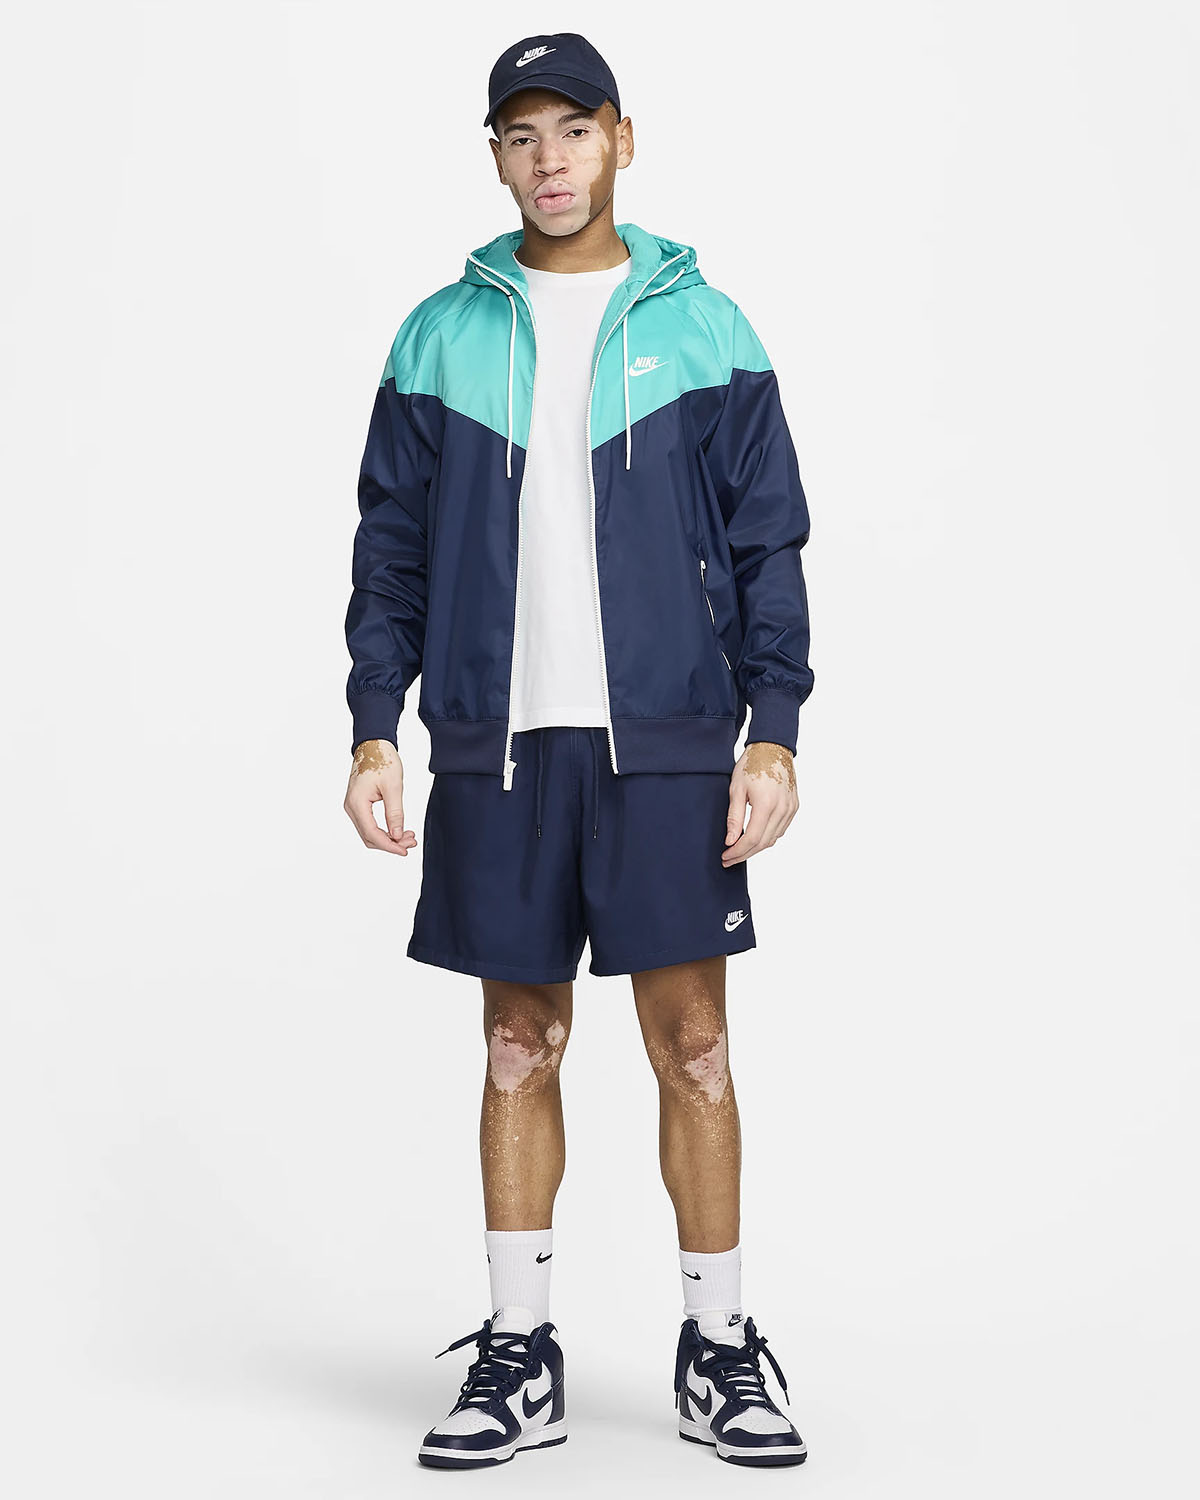 Nike Sportswear Windrunner Hooded Jacket Dusty Cactus Midnight Navy Outfit